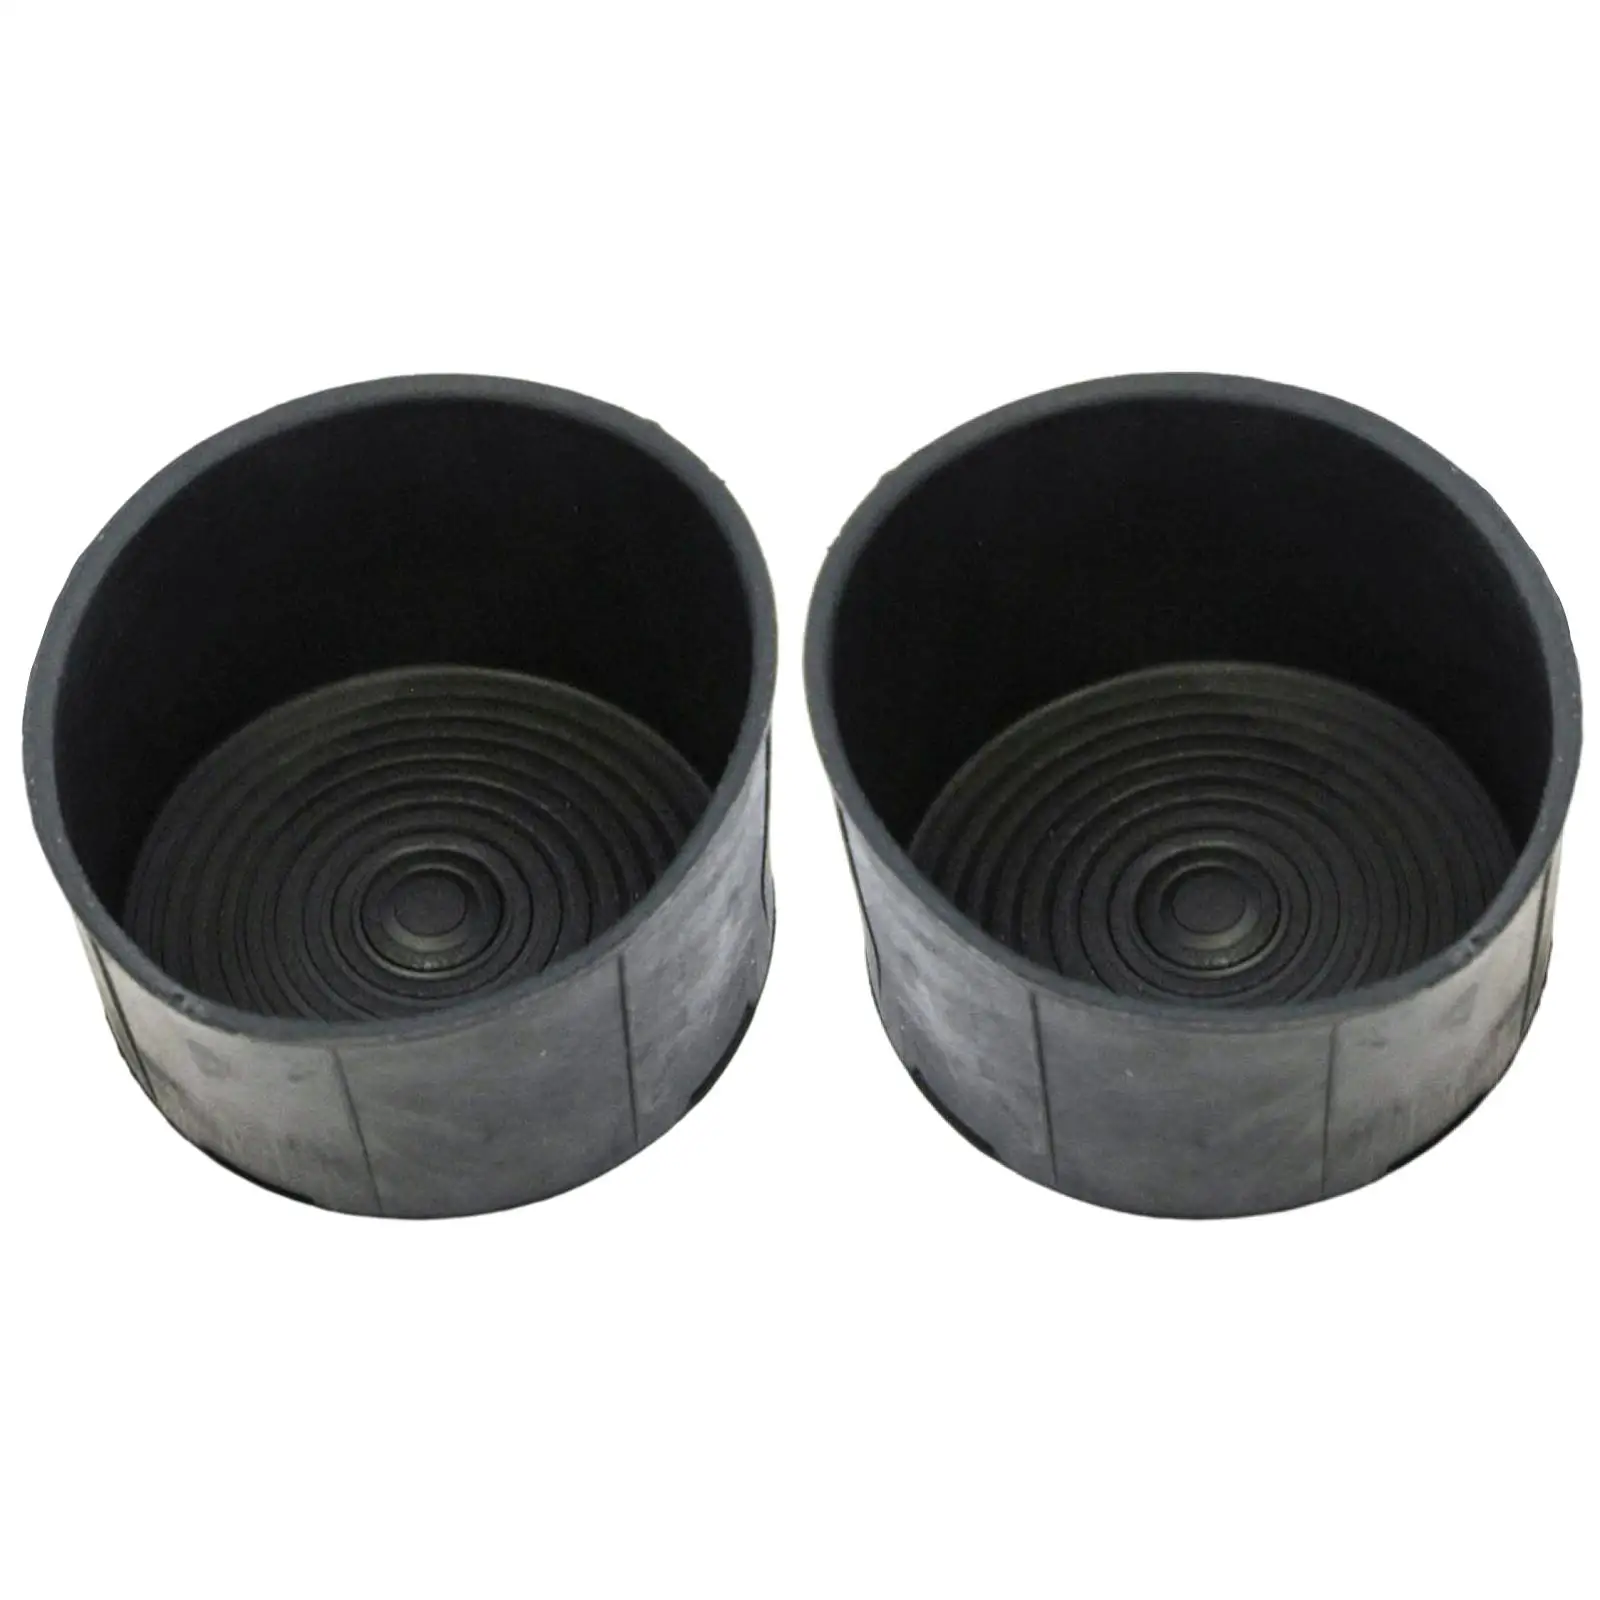 2 Count Rubber Cup Holder Insert 1EB17DX9Ab for  RAM 1500 2009-16